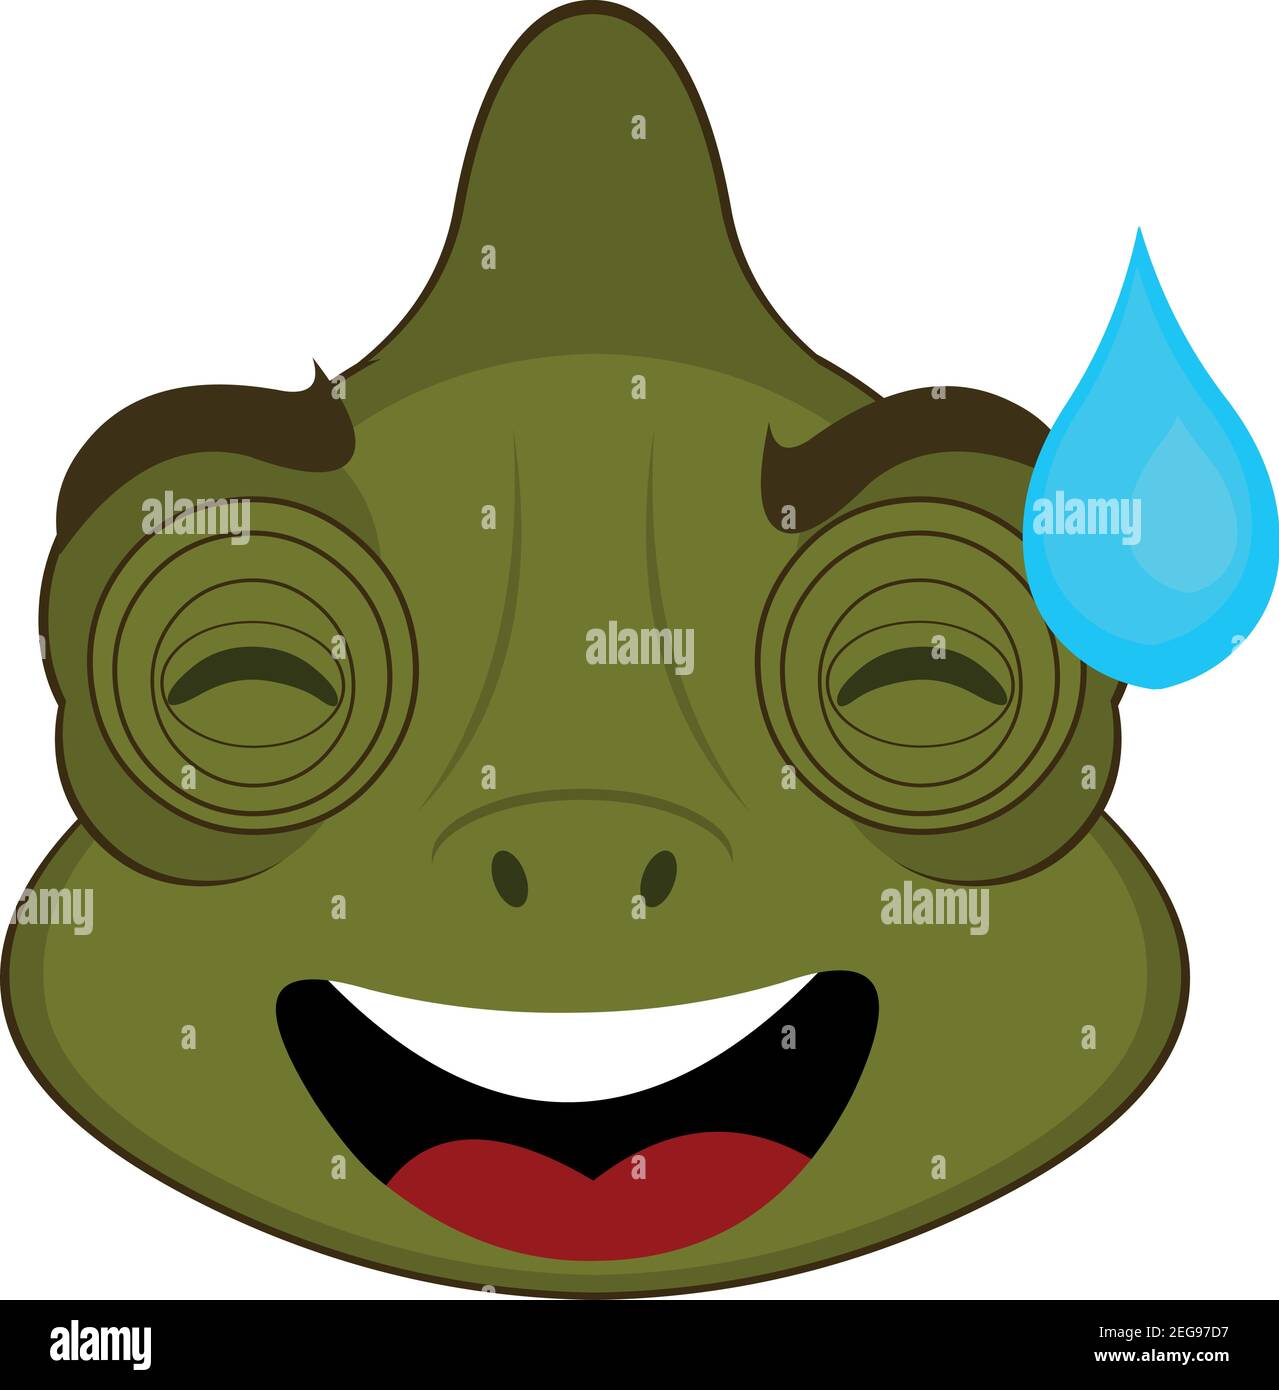 Vector emoticon illustration cartoon of a chameleon's head emoticon with an expression of confusion dropping a drop of sweat Stock Vector